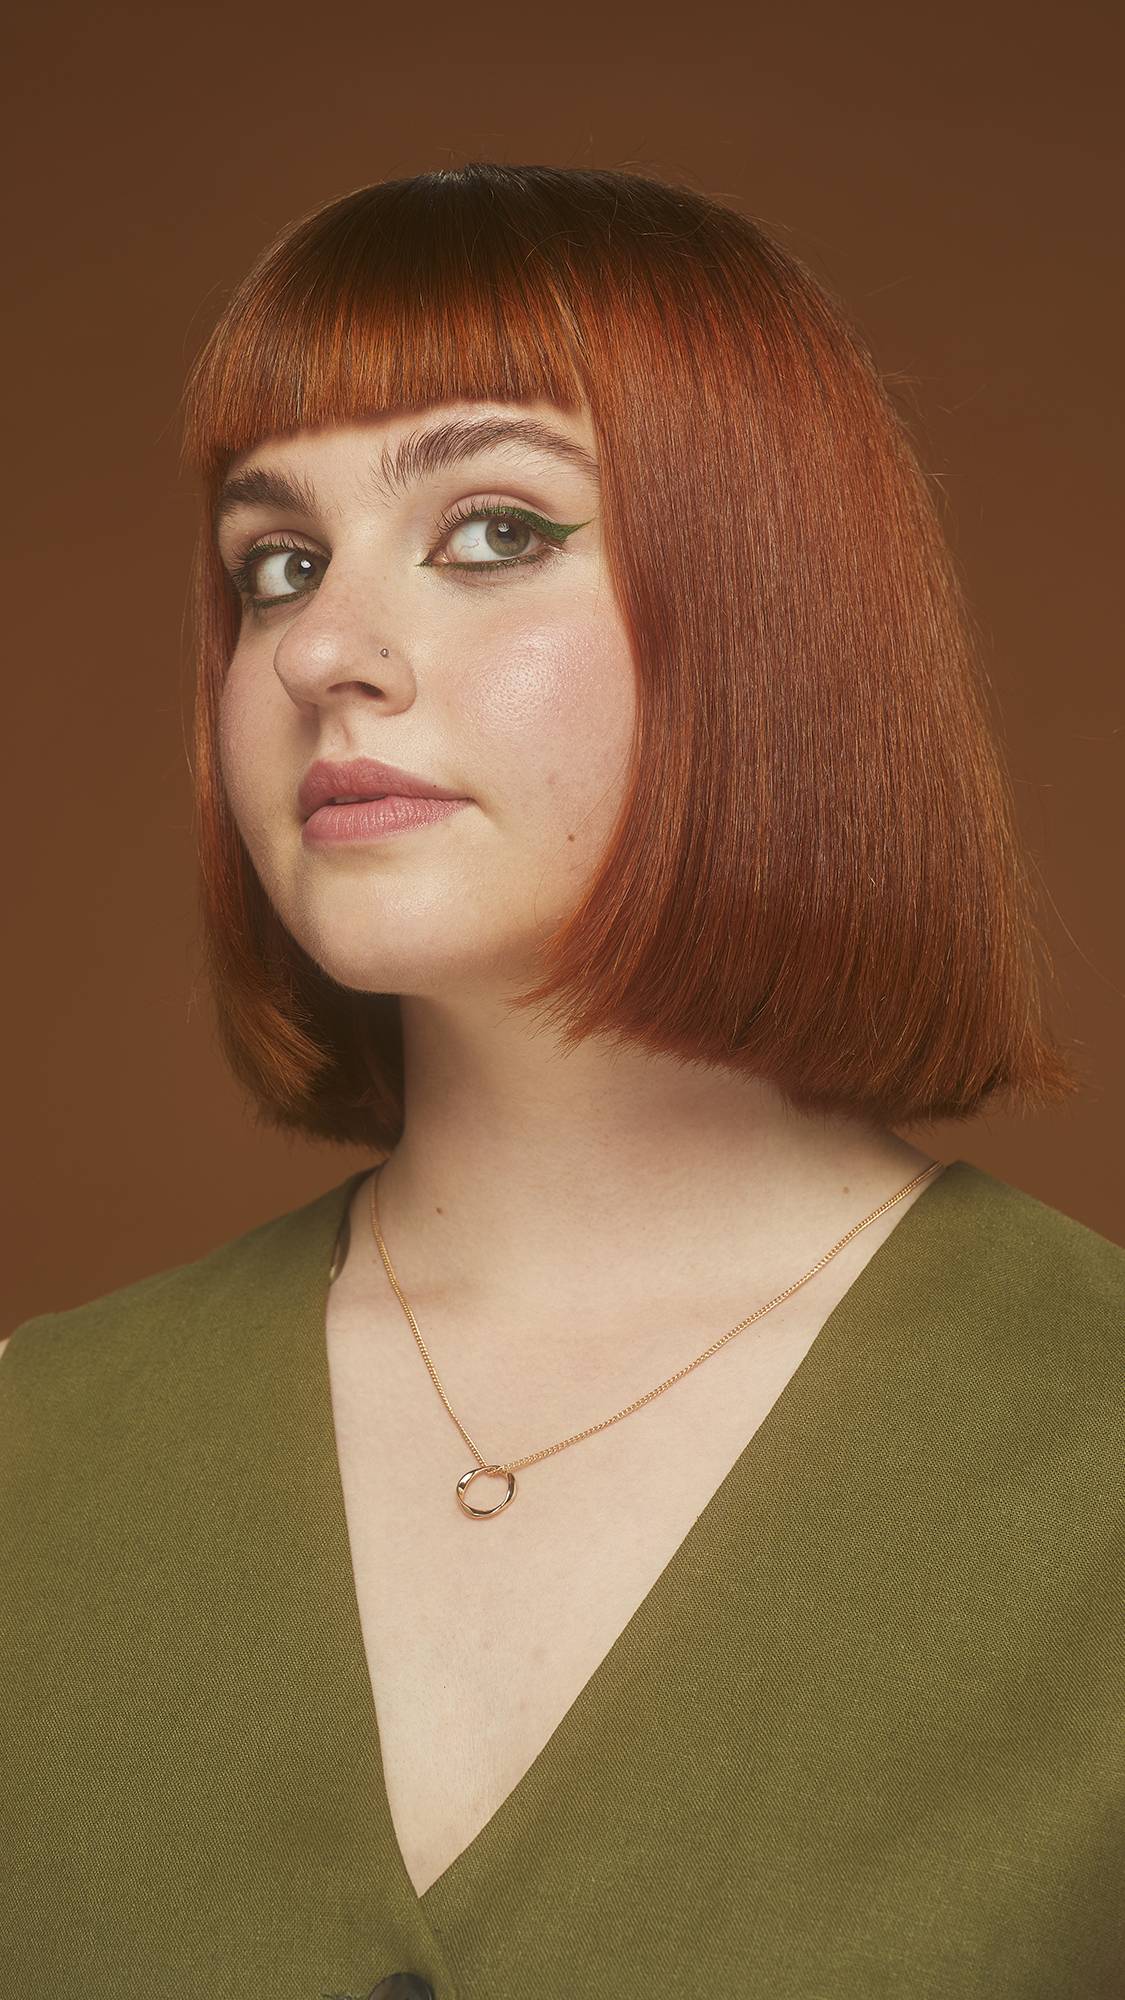 Image shows model on an earthy background. They have bold eyeliner with their hair showing deep reds, browns and coppers.